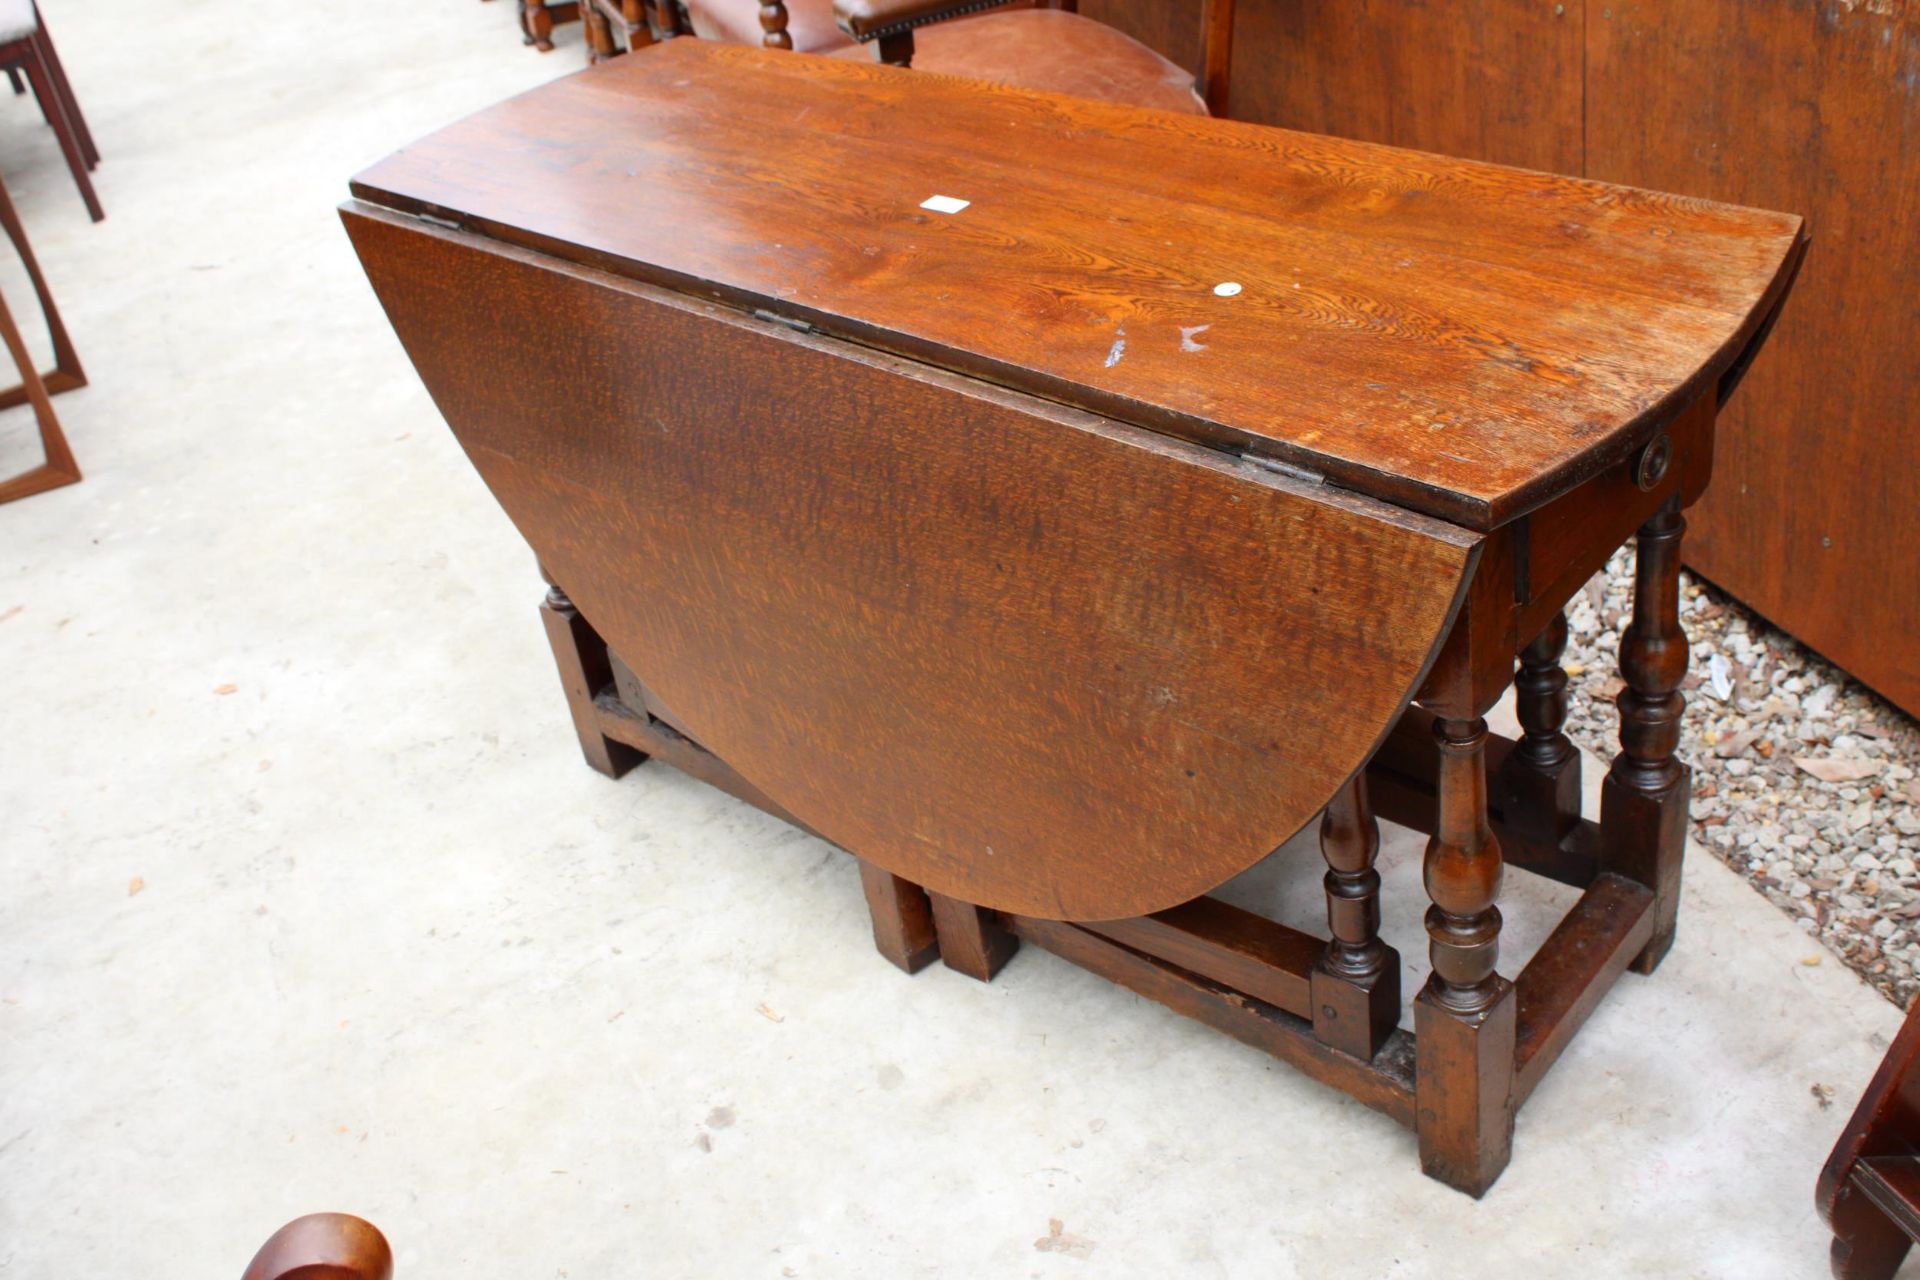 AN OAK GEORGE III OVAL GATE LEG DINING TABLE WITH TWO DRAWERS ON TURNED LEGS 59" X 53" OPENED